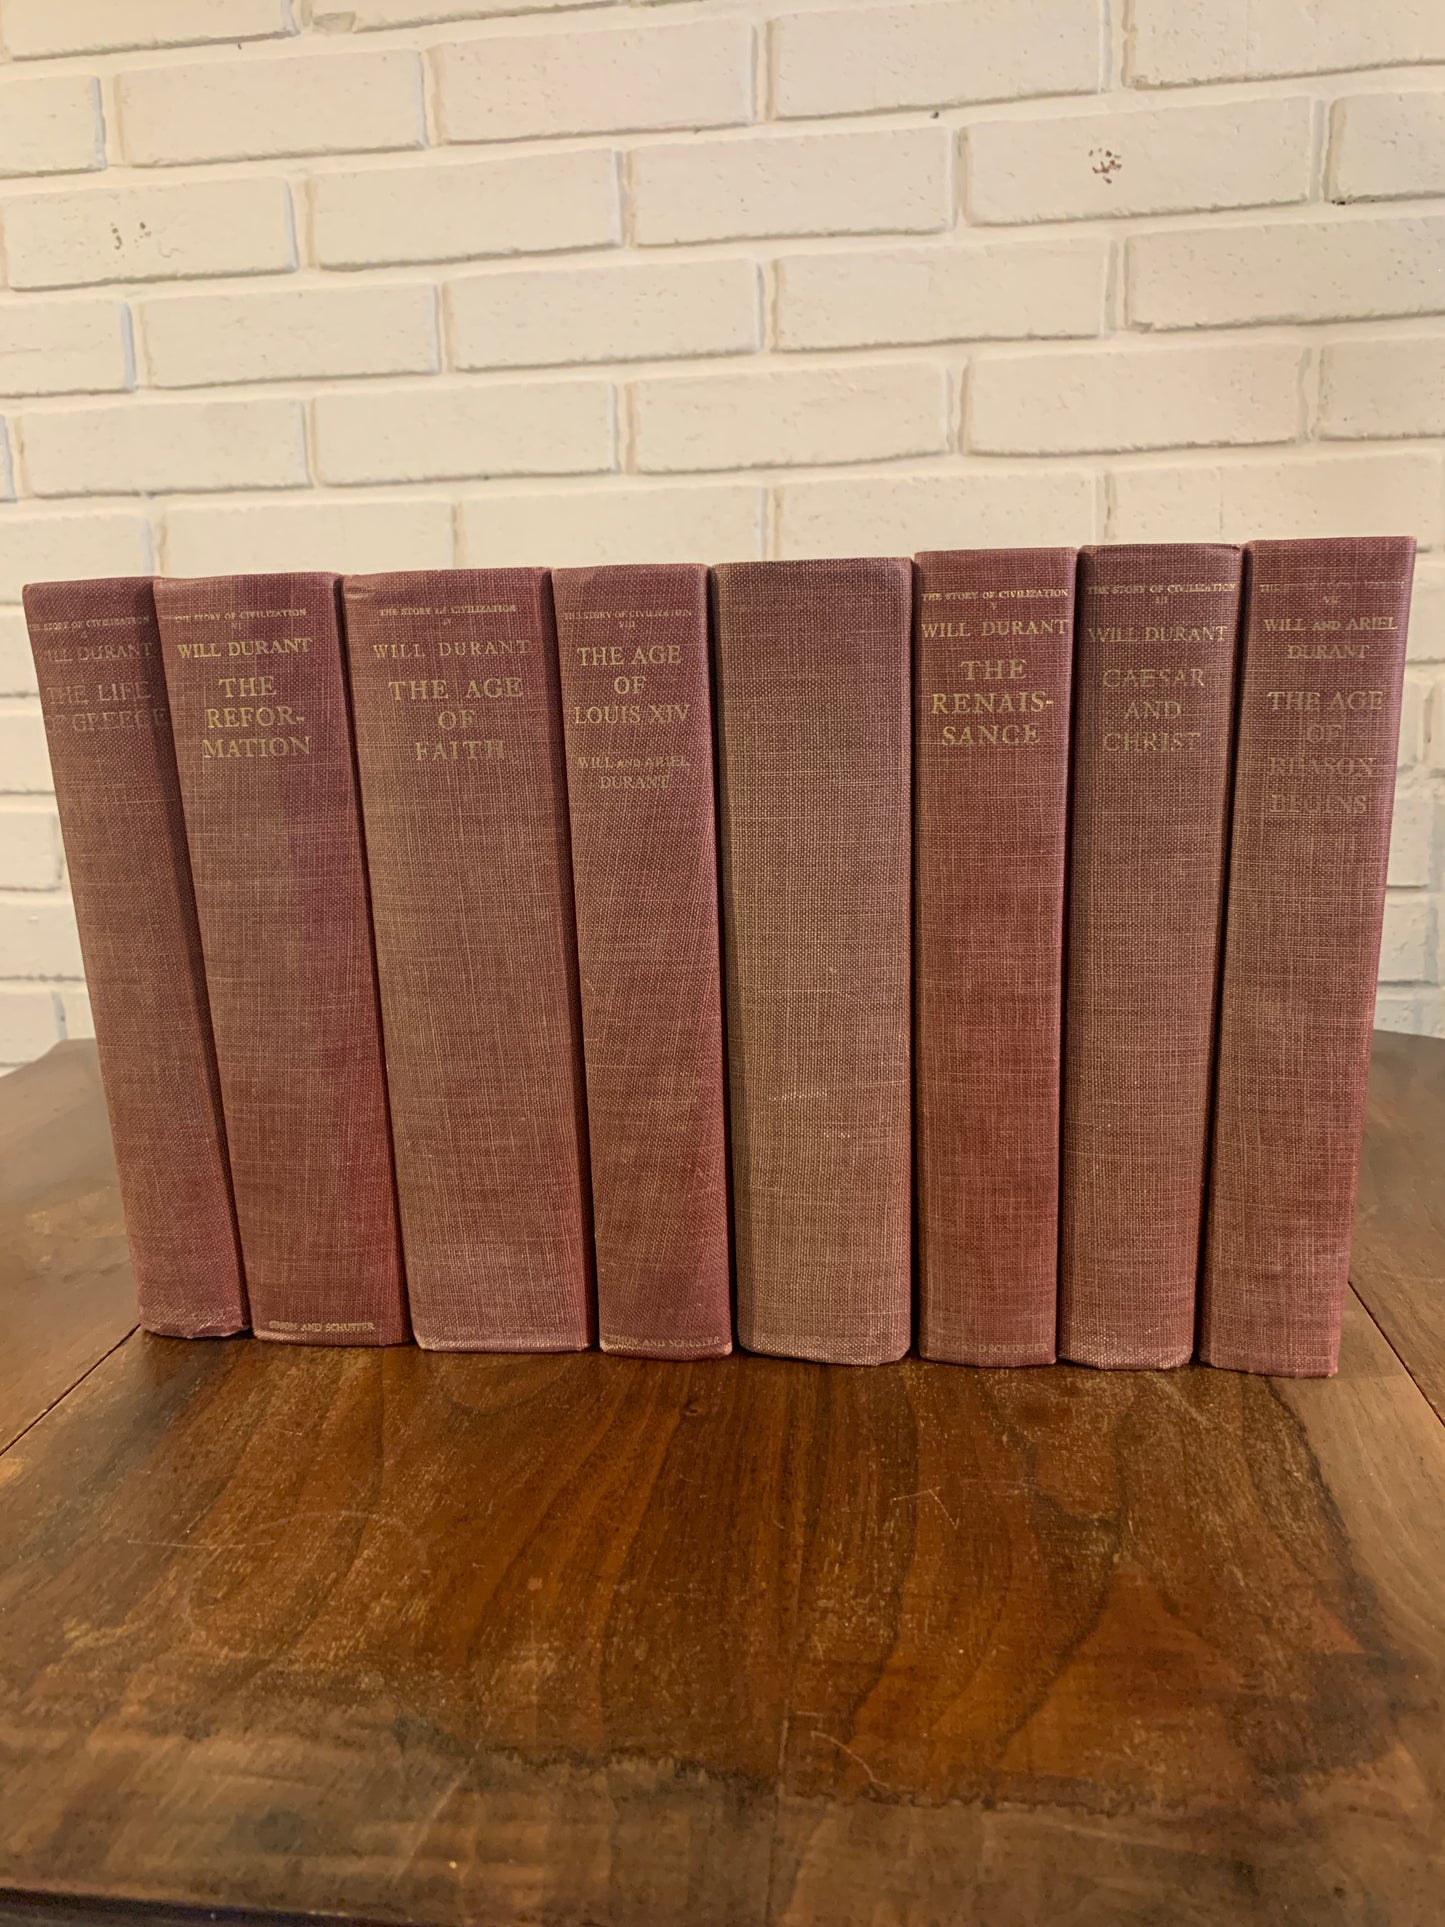 The Story of Civilization by Will and Ariel Durant, 8 Volume Set